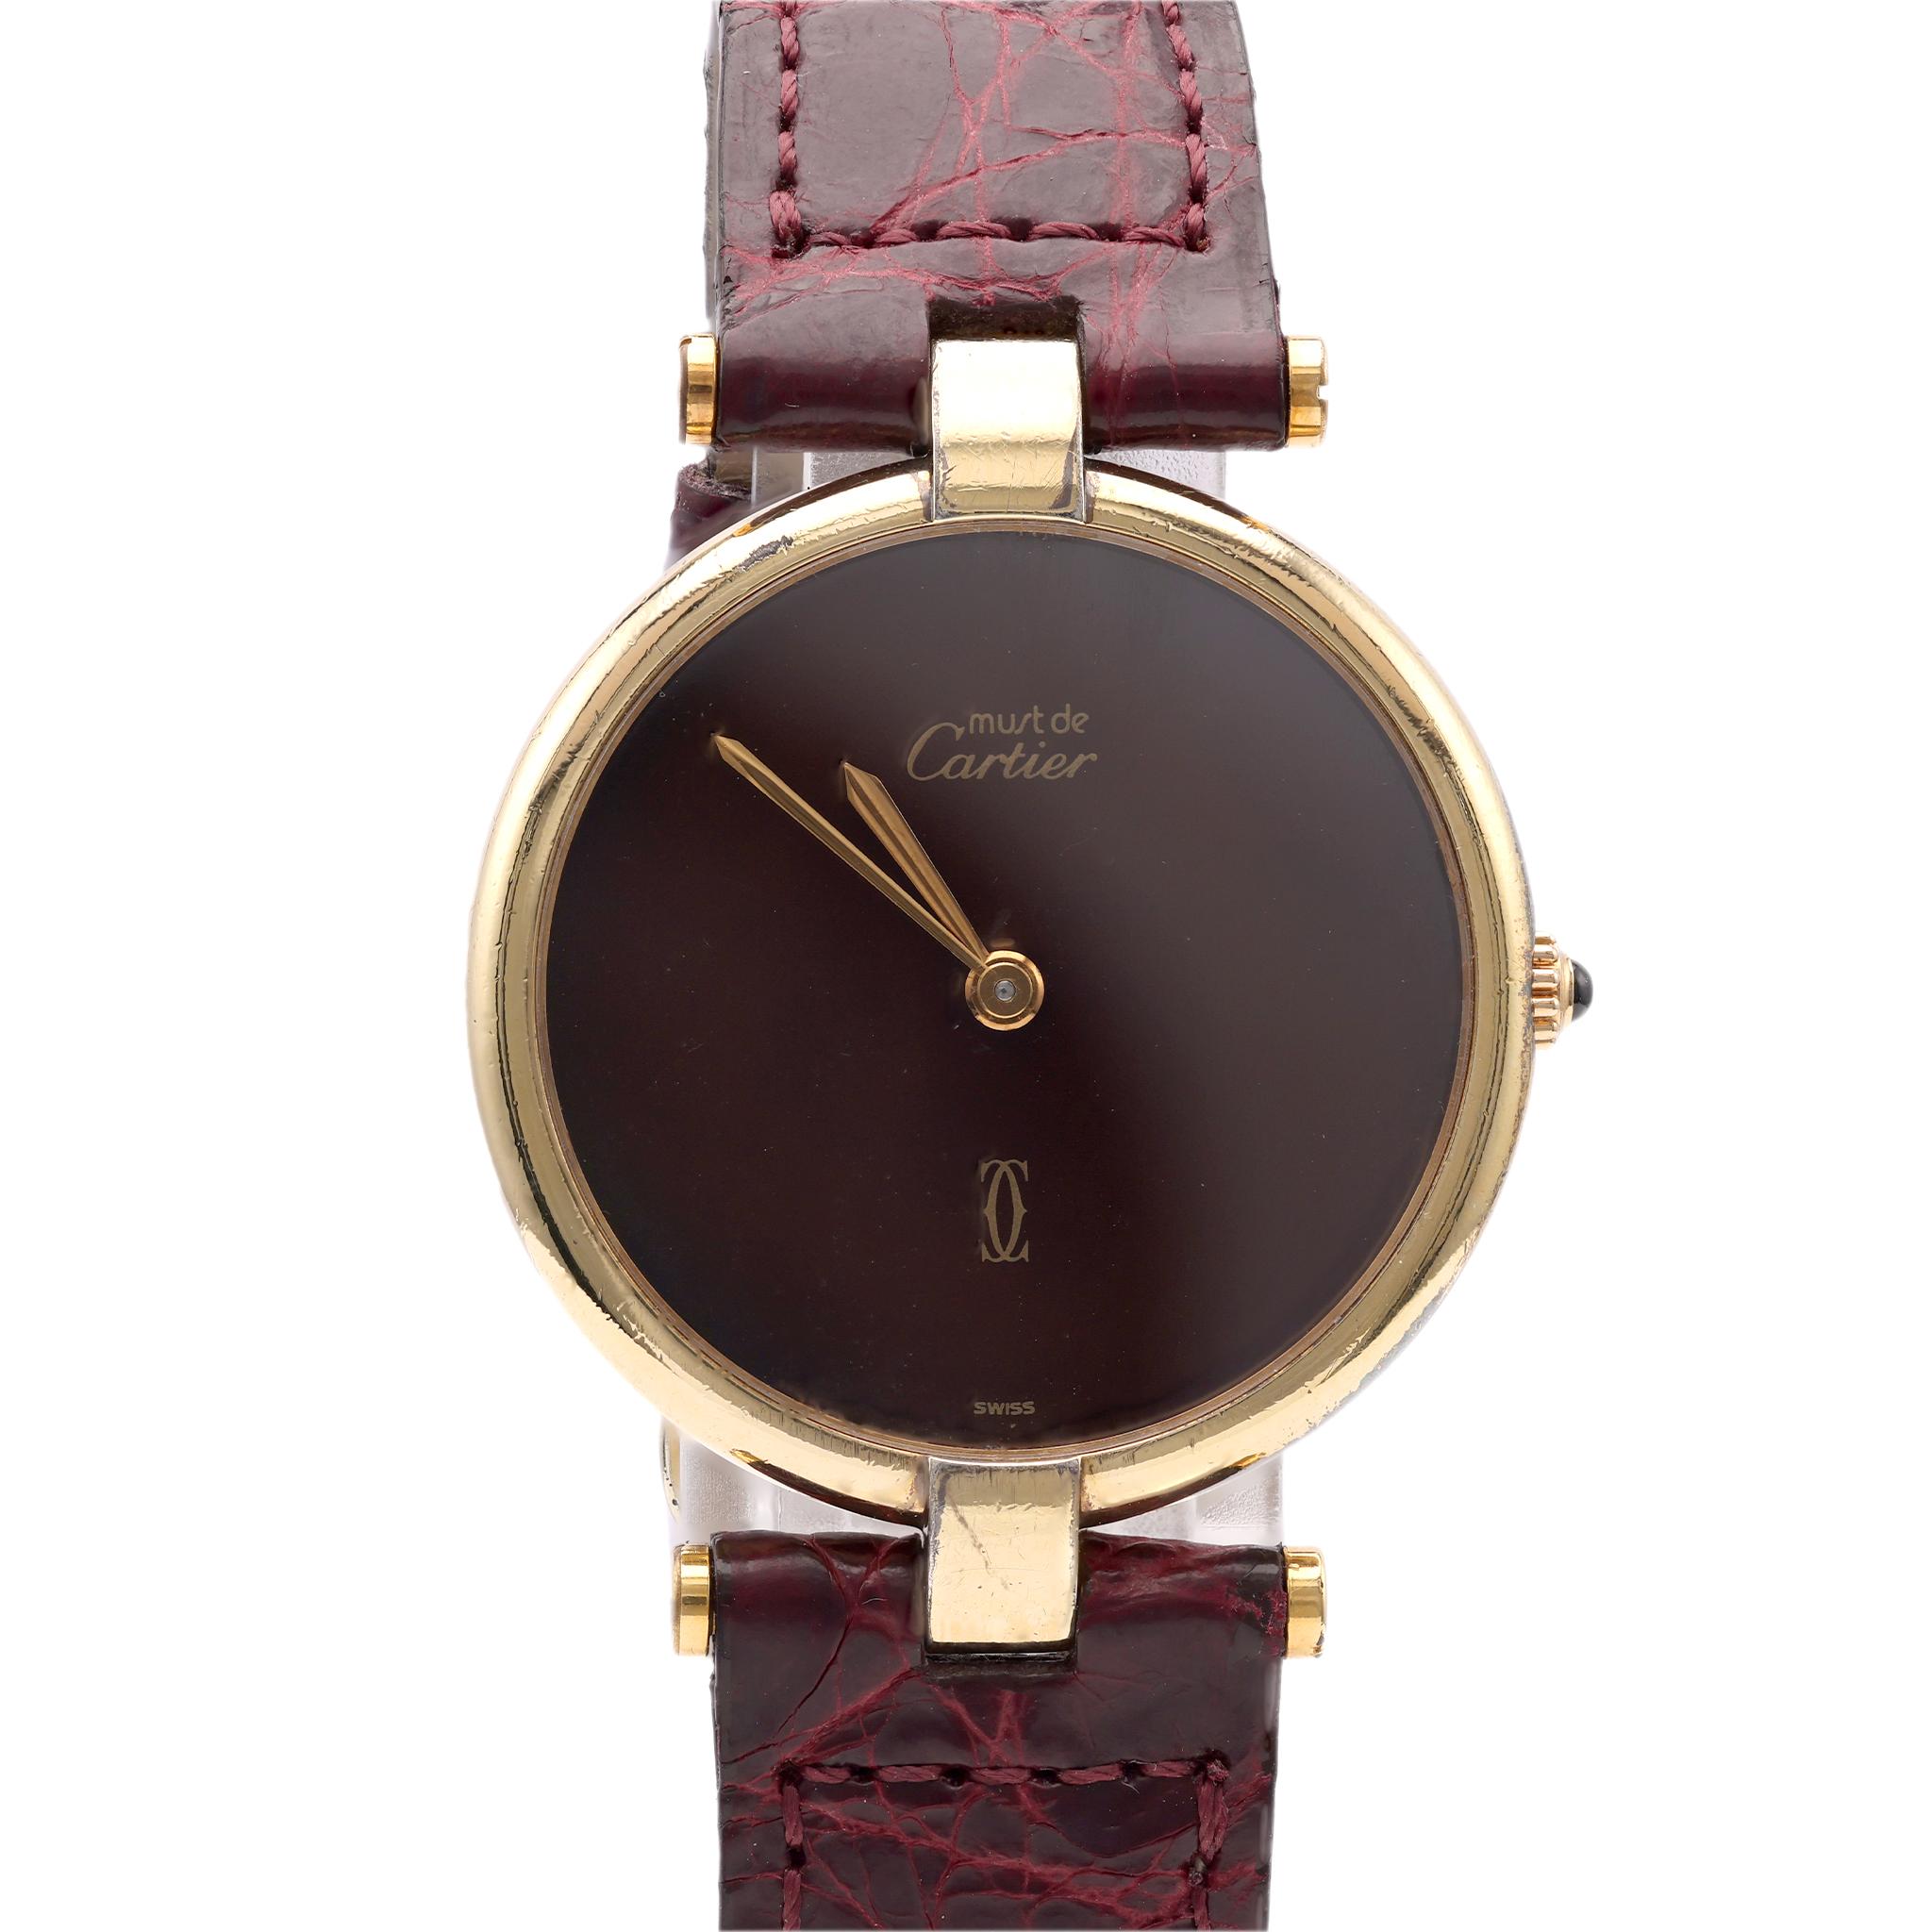 Vintage Cartier Must de Vendome Leather Watch In Excellent Condition For Sale In Beverly Hills, CA